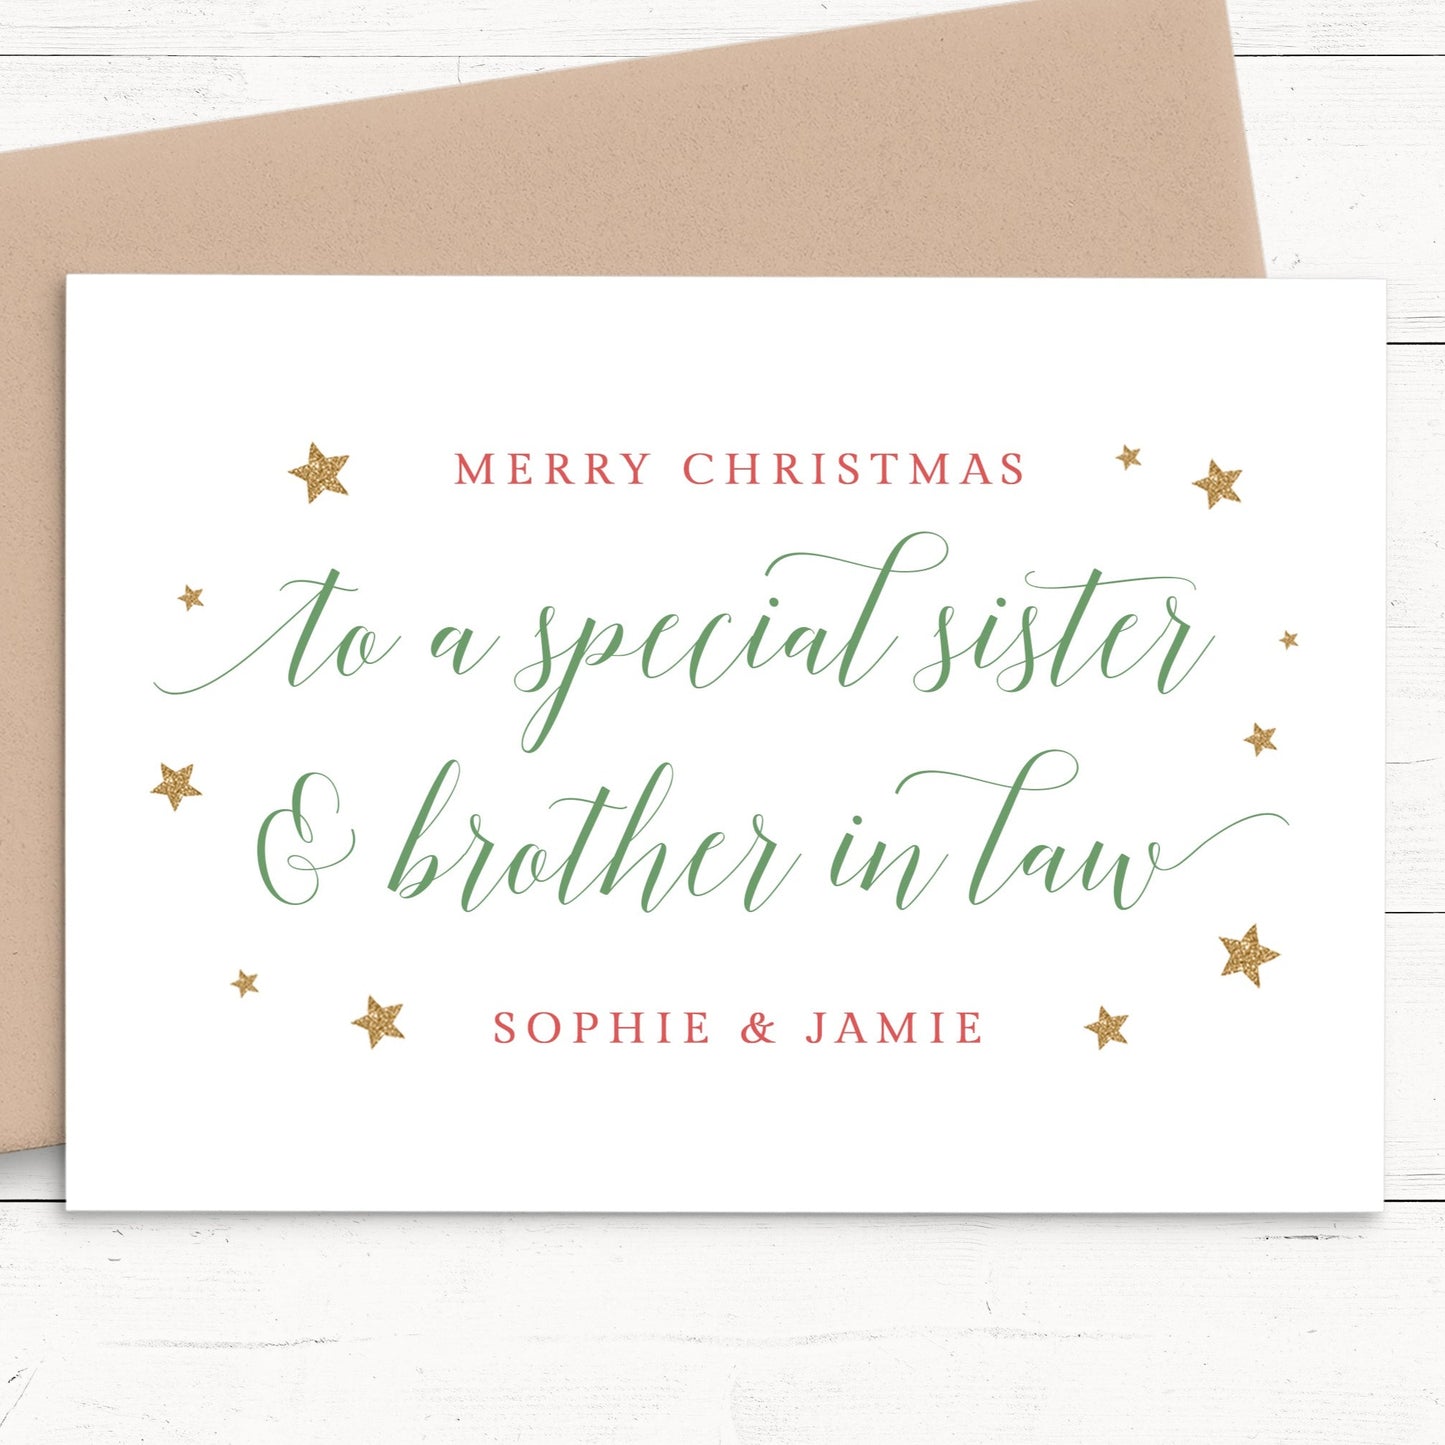 sister and brother in law merry christmas personalised christmas card matte white cardstock kraft brown envelope boy girl sister brother in-laws